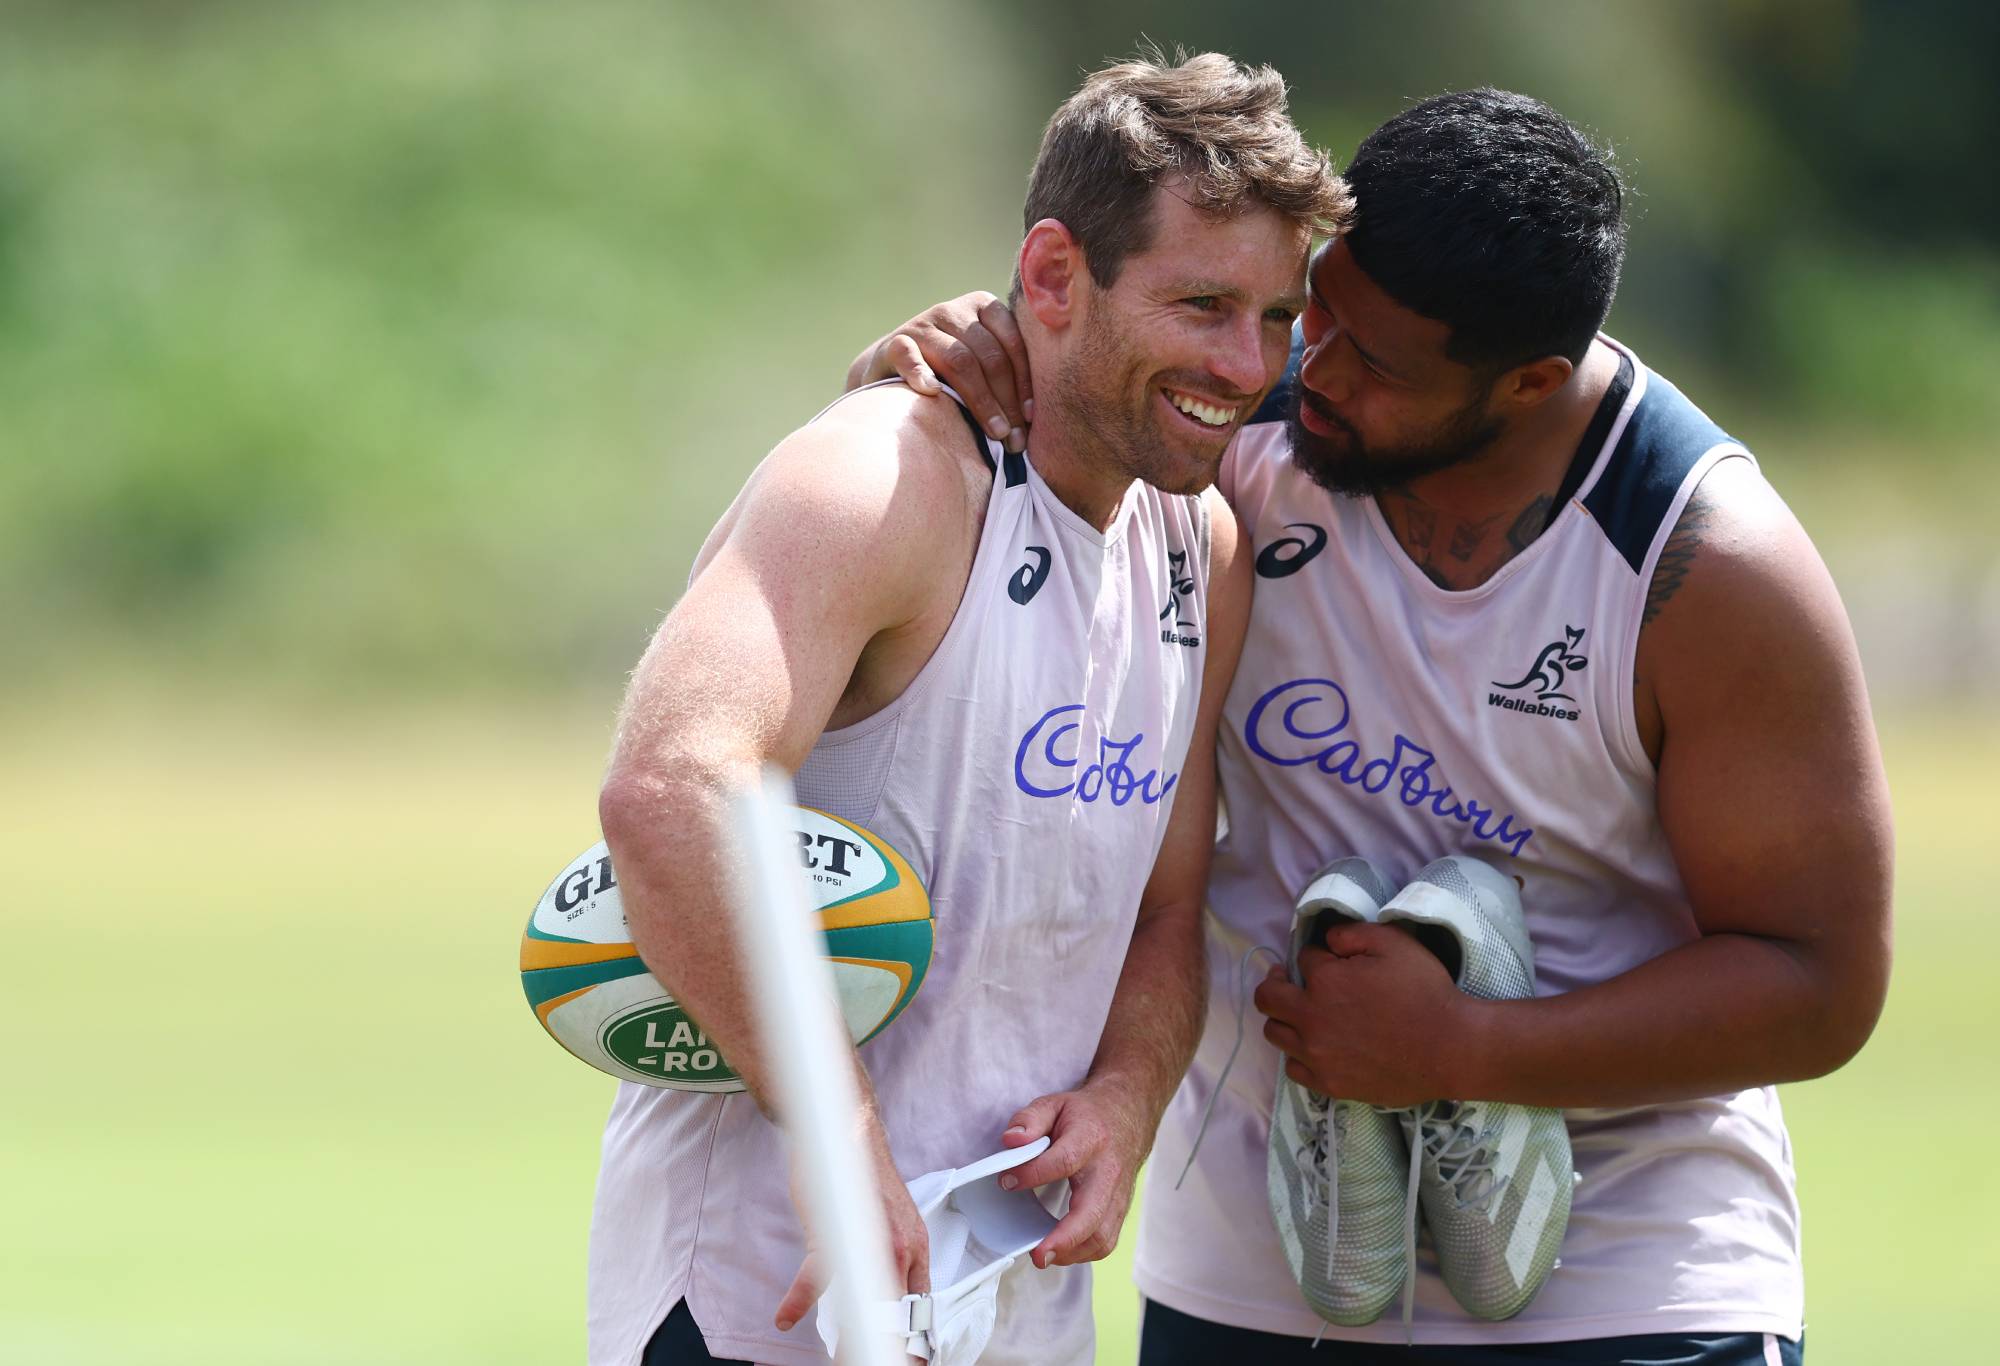 Bernard Foley and Folau Fainga'a during an Australia Wallabies training session at Sanctuary Cove on September 01, 2022 in Gold Coast, Australia. (Photo by Chris Hyde/Getty Images)